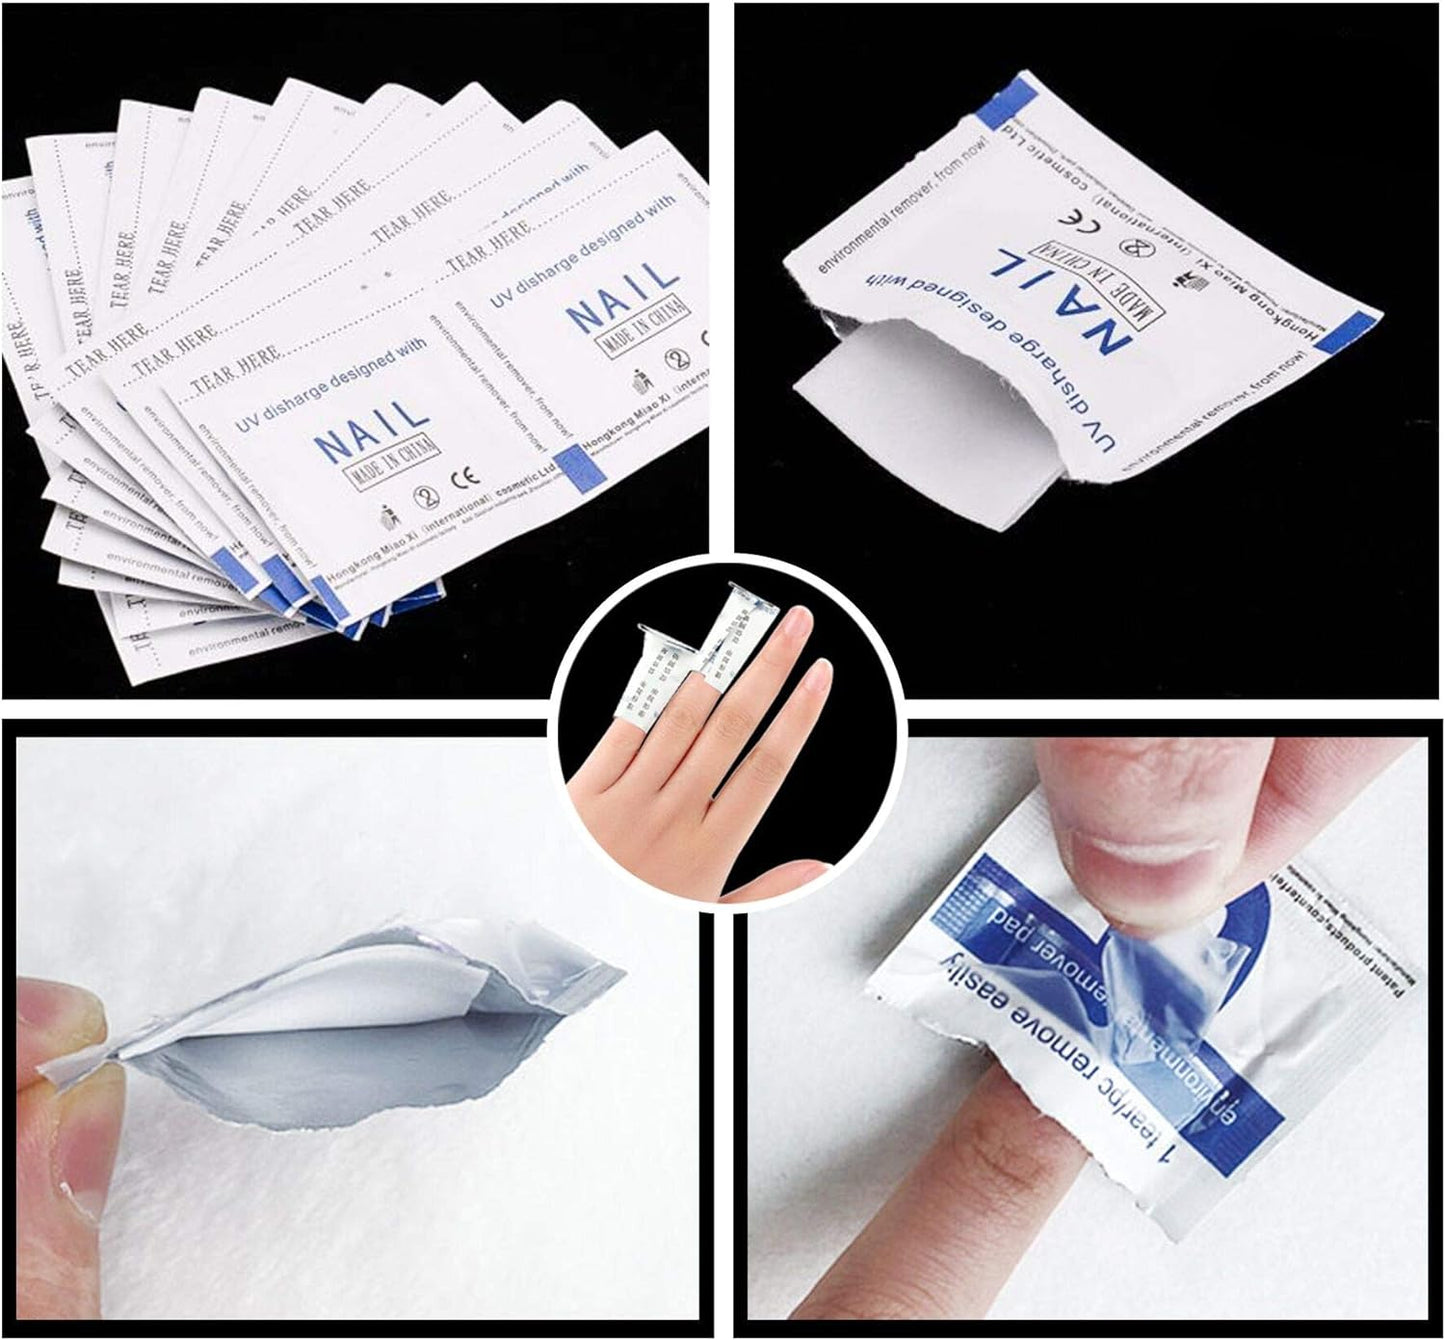 Gel Polish Remover Individually Wrapped Pre-Soaked Pads (200 pcs)